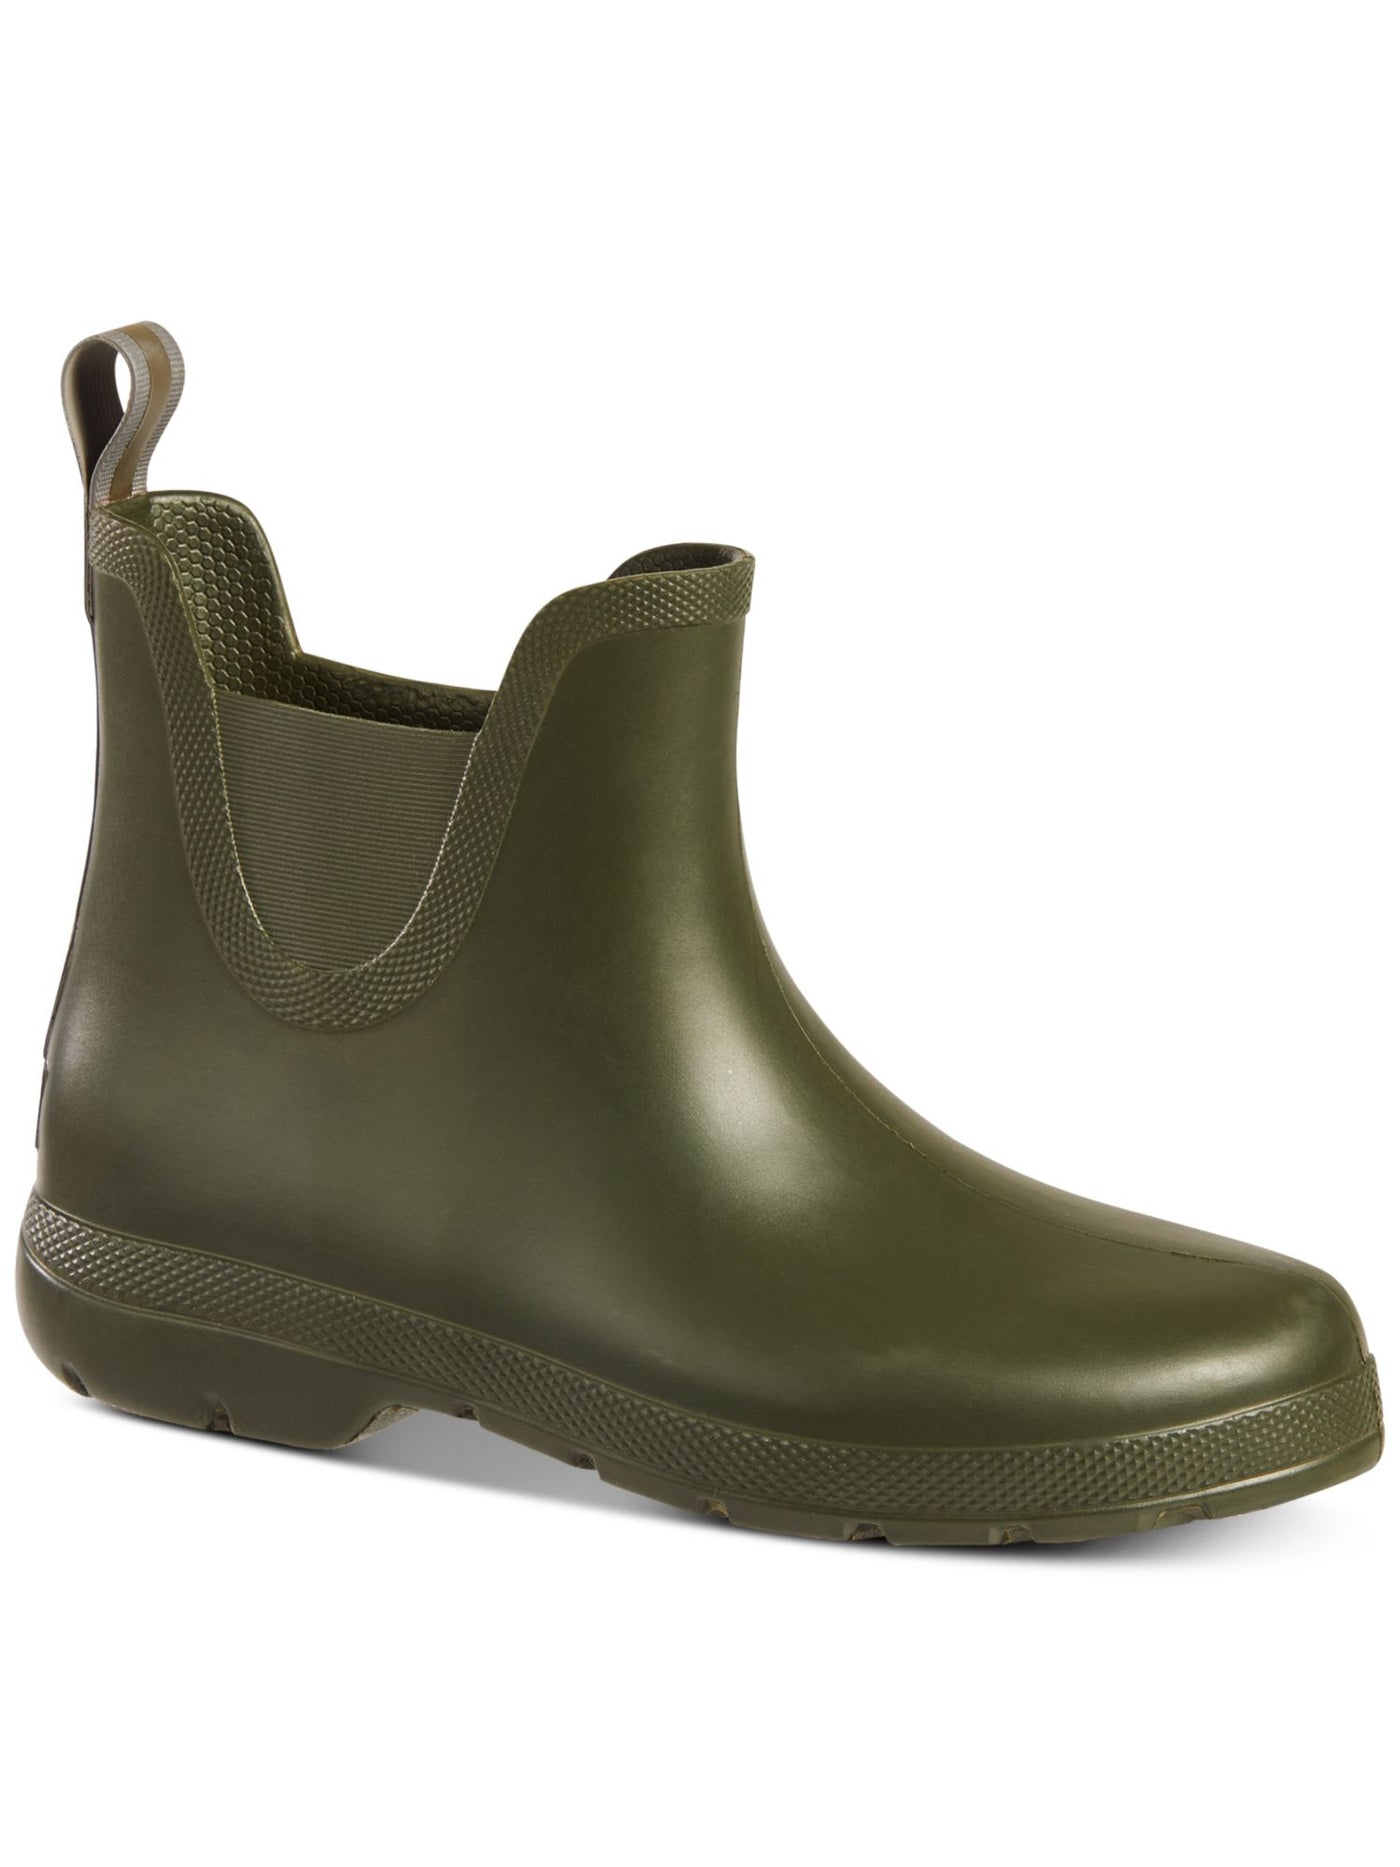 TOTES Womens Green Everywear Technology Chelsea Boots Waterproof Slip Resistant Cirrus Round Toe Rain Boots 7